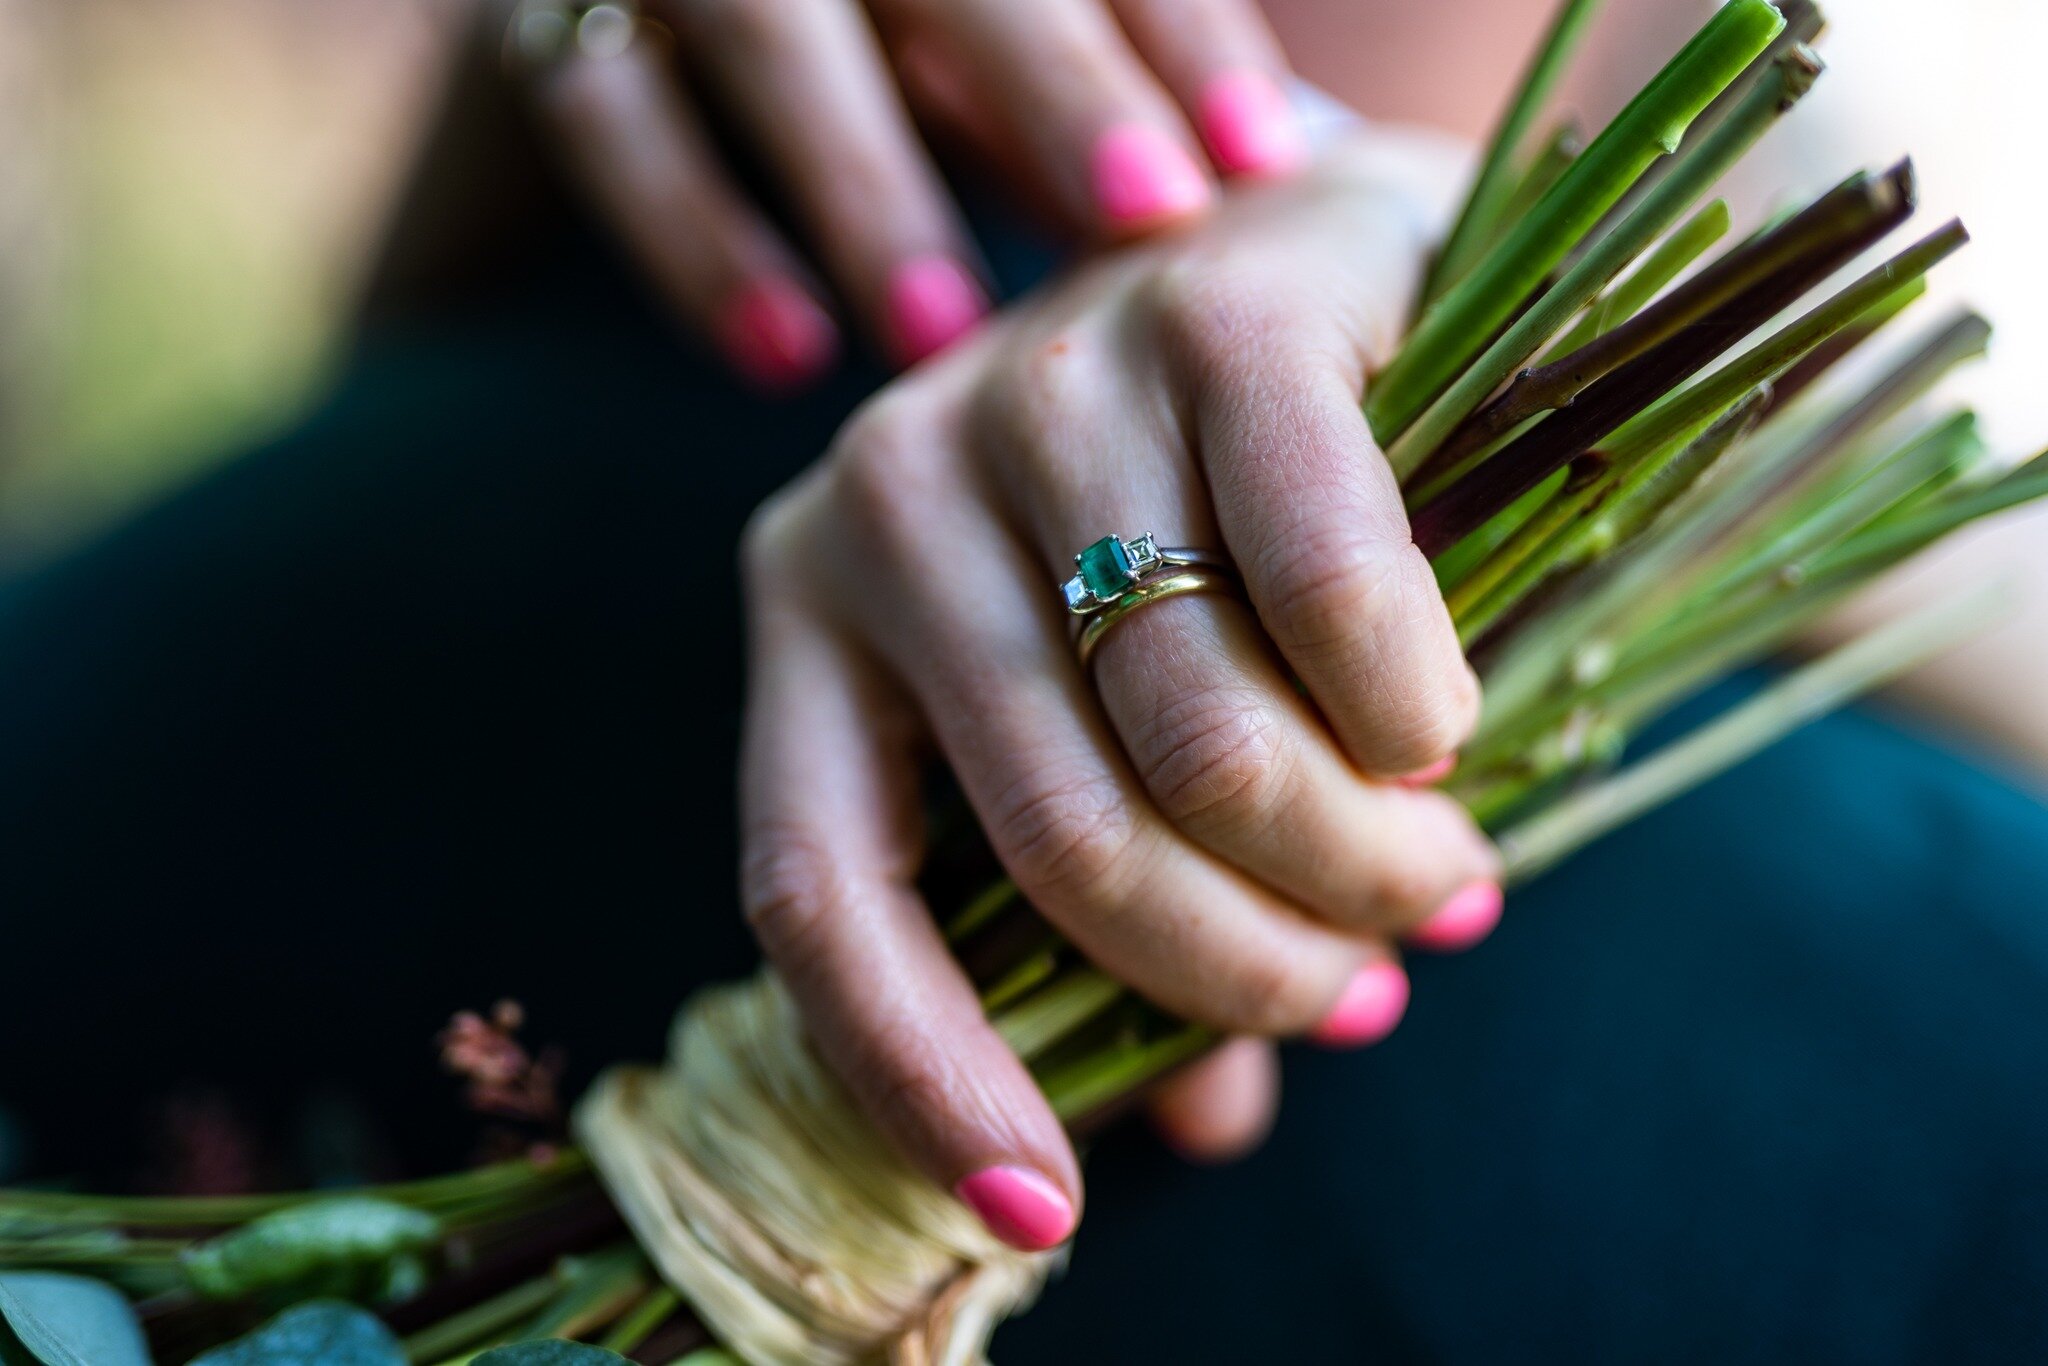 The wedding ring is more than just a piece of jewelry, it's a symbol of eternal love and commitment. It's an honor to capture these precious details for my couples. 

#WeddingRings #weddingdetails #weddingdetailshot #ukweddingphotography #shesaidyess